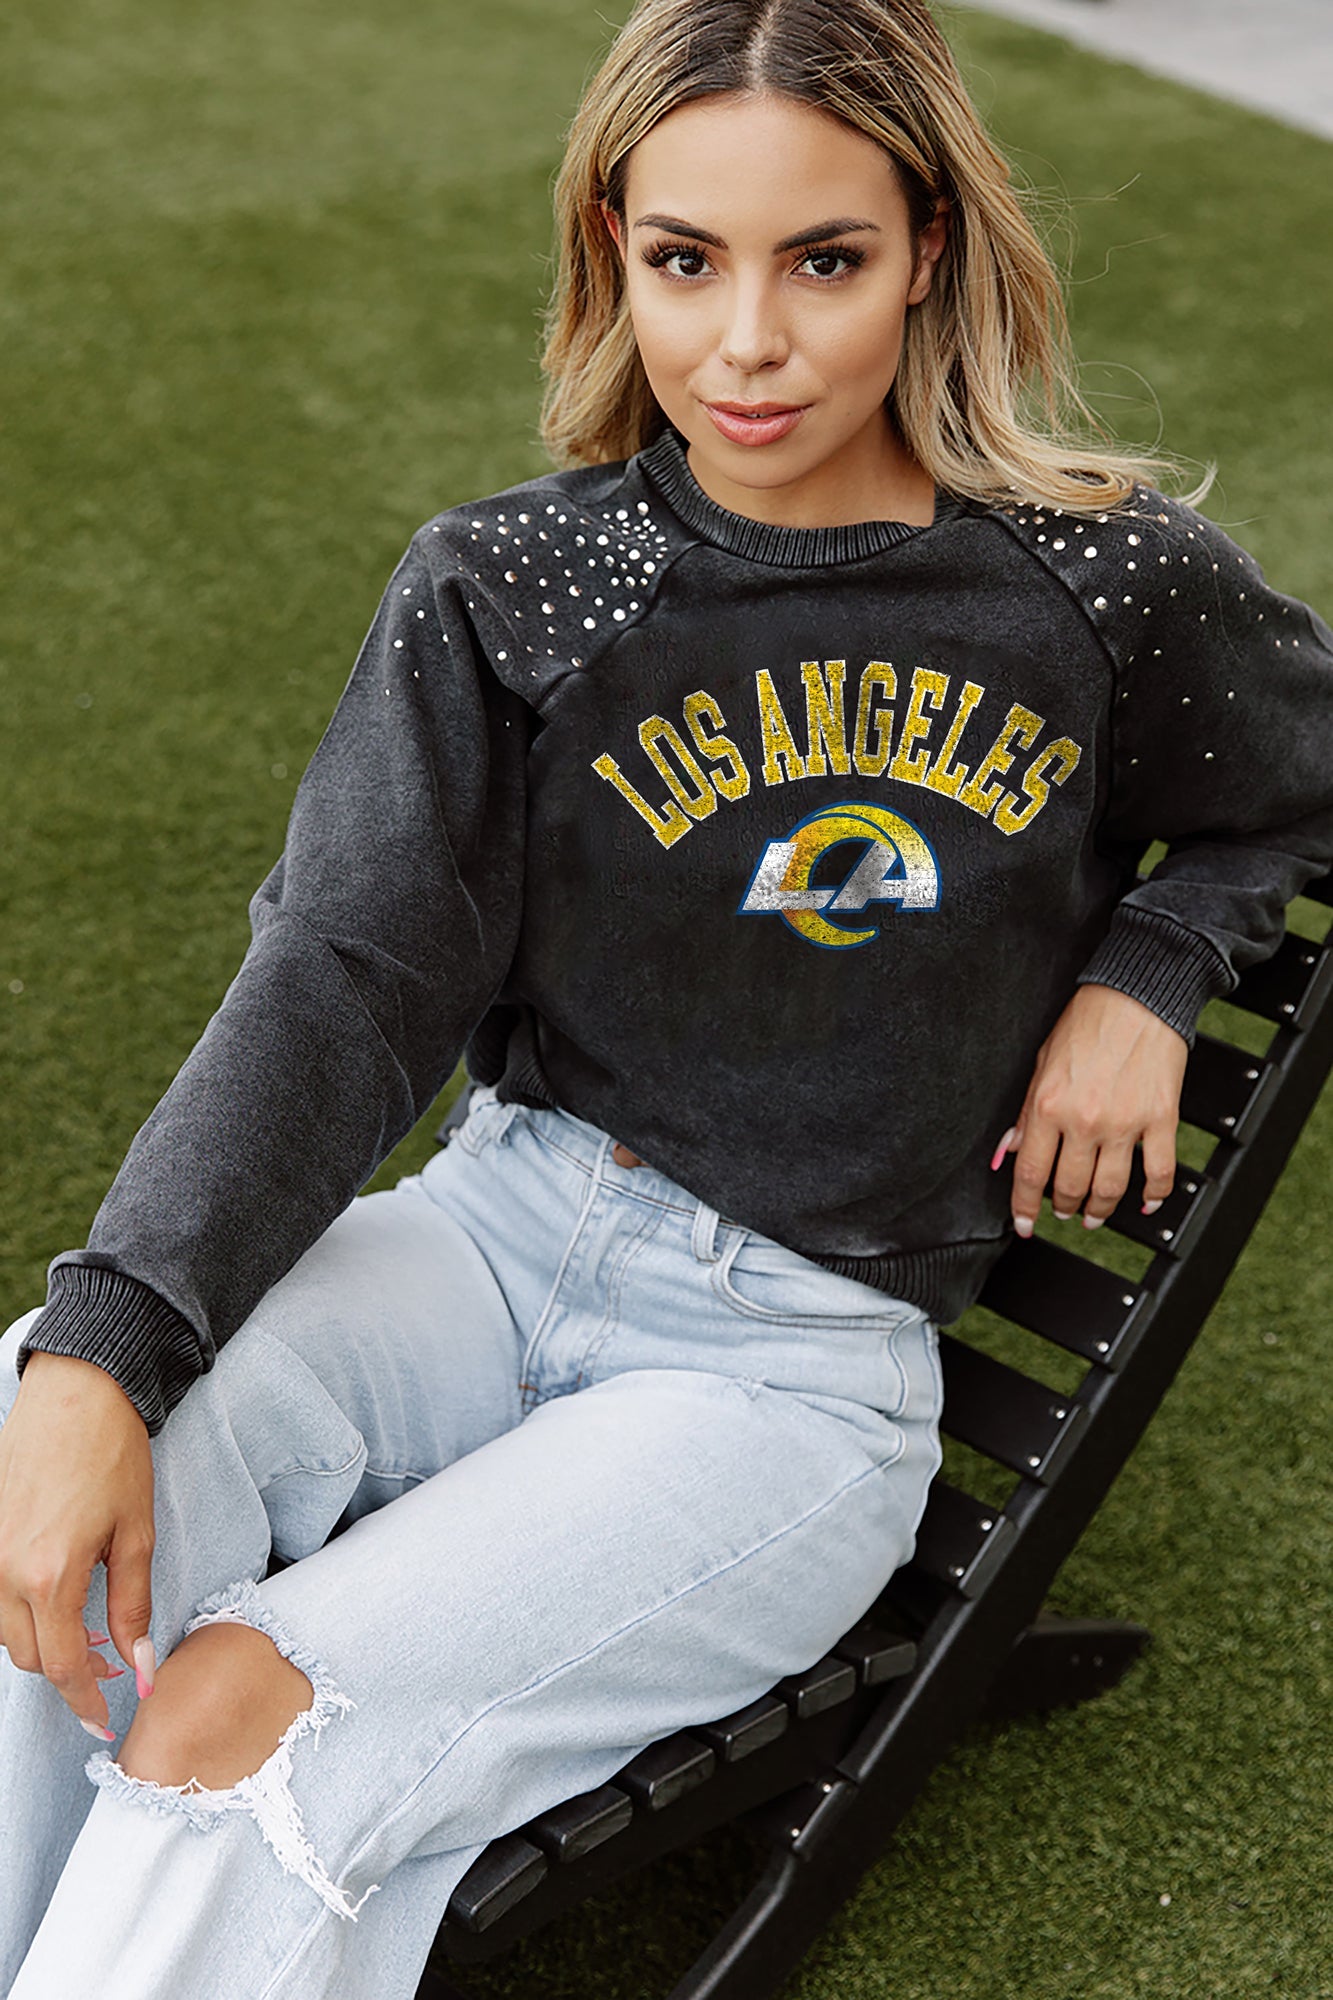 LOS ANGELES RAMS GAMEDAY GLITZ LONG SLEEVE TEE WITH SEQUIN TRIM BACK AND  SLEEVE DETAIL